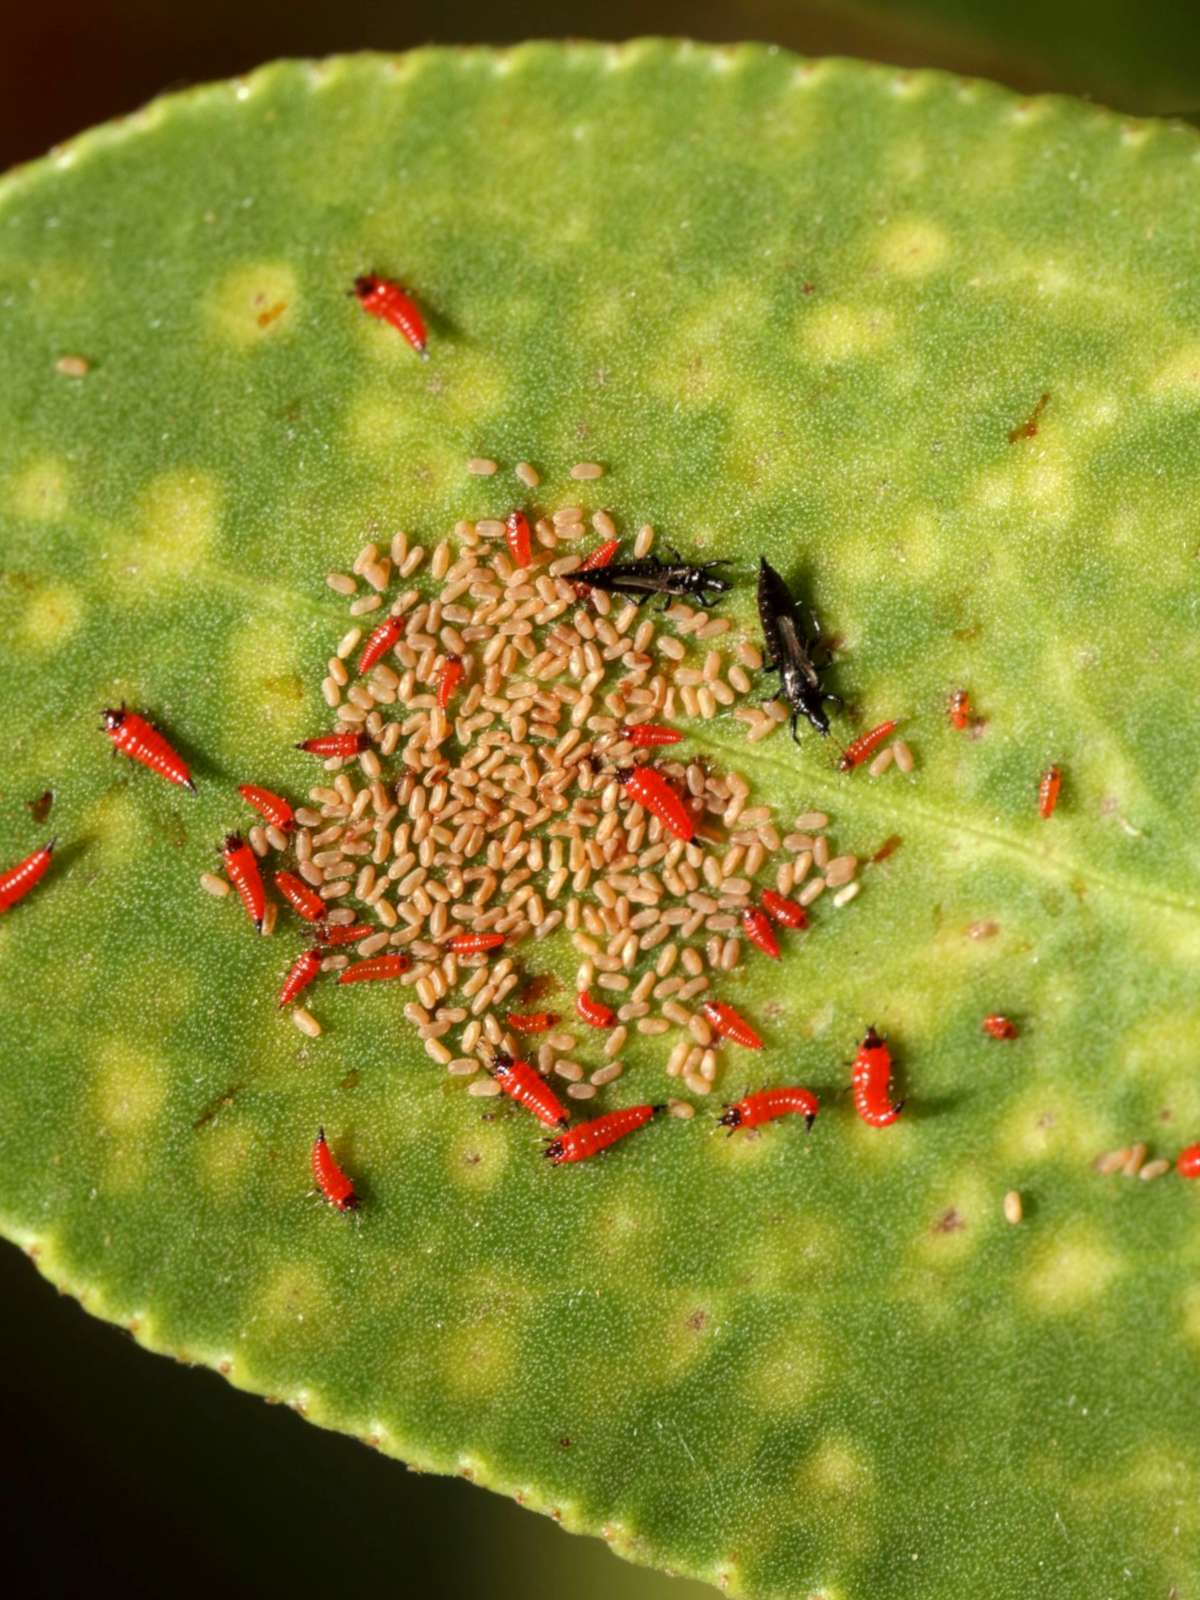 Thrips eggs clustered on a leaf with adults and nymphs nearby.